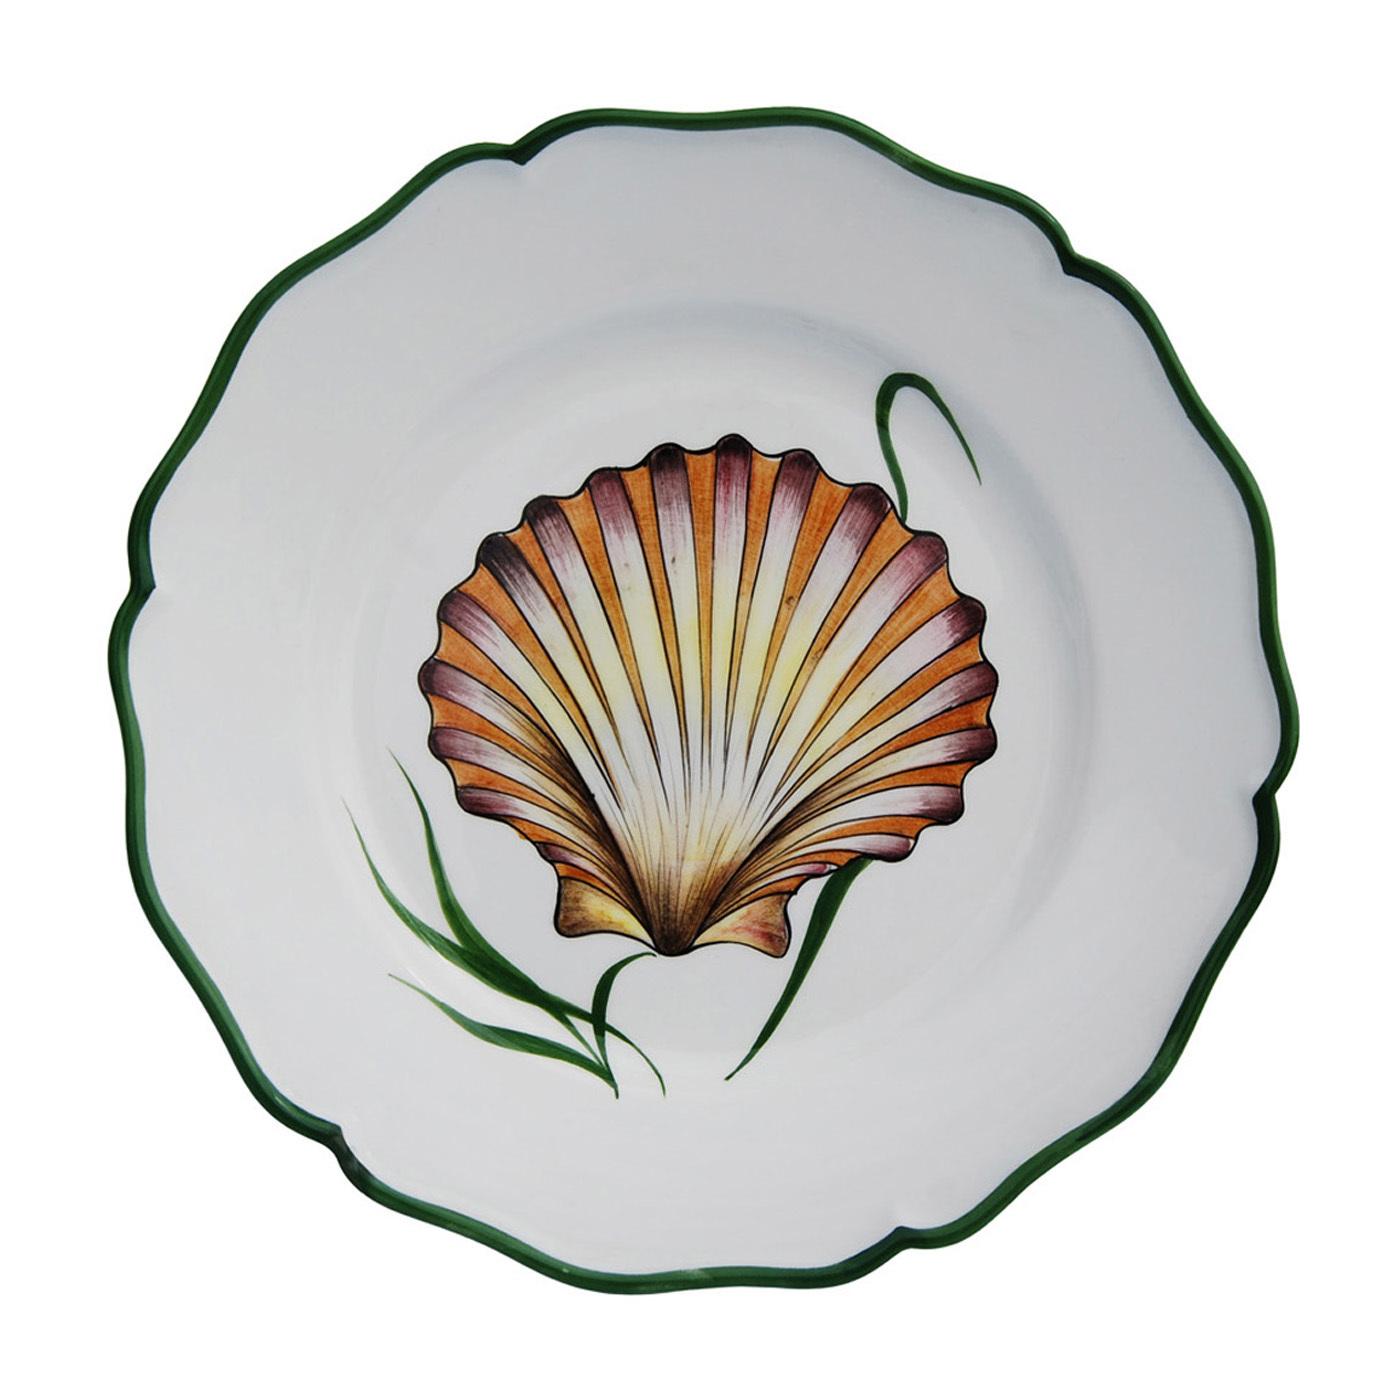 Decorative shell motifs on an elegant white background are set against a dark green rim in this set of 4 ceramic plates entirely handcrafted and hand painted by expert artisans in the Northern-Italy town of Este. This set matches other sea-life